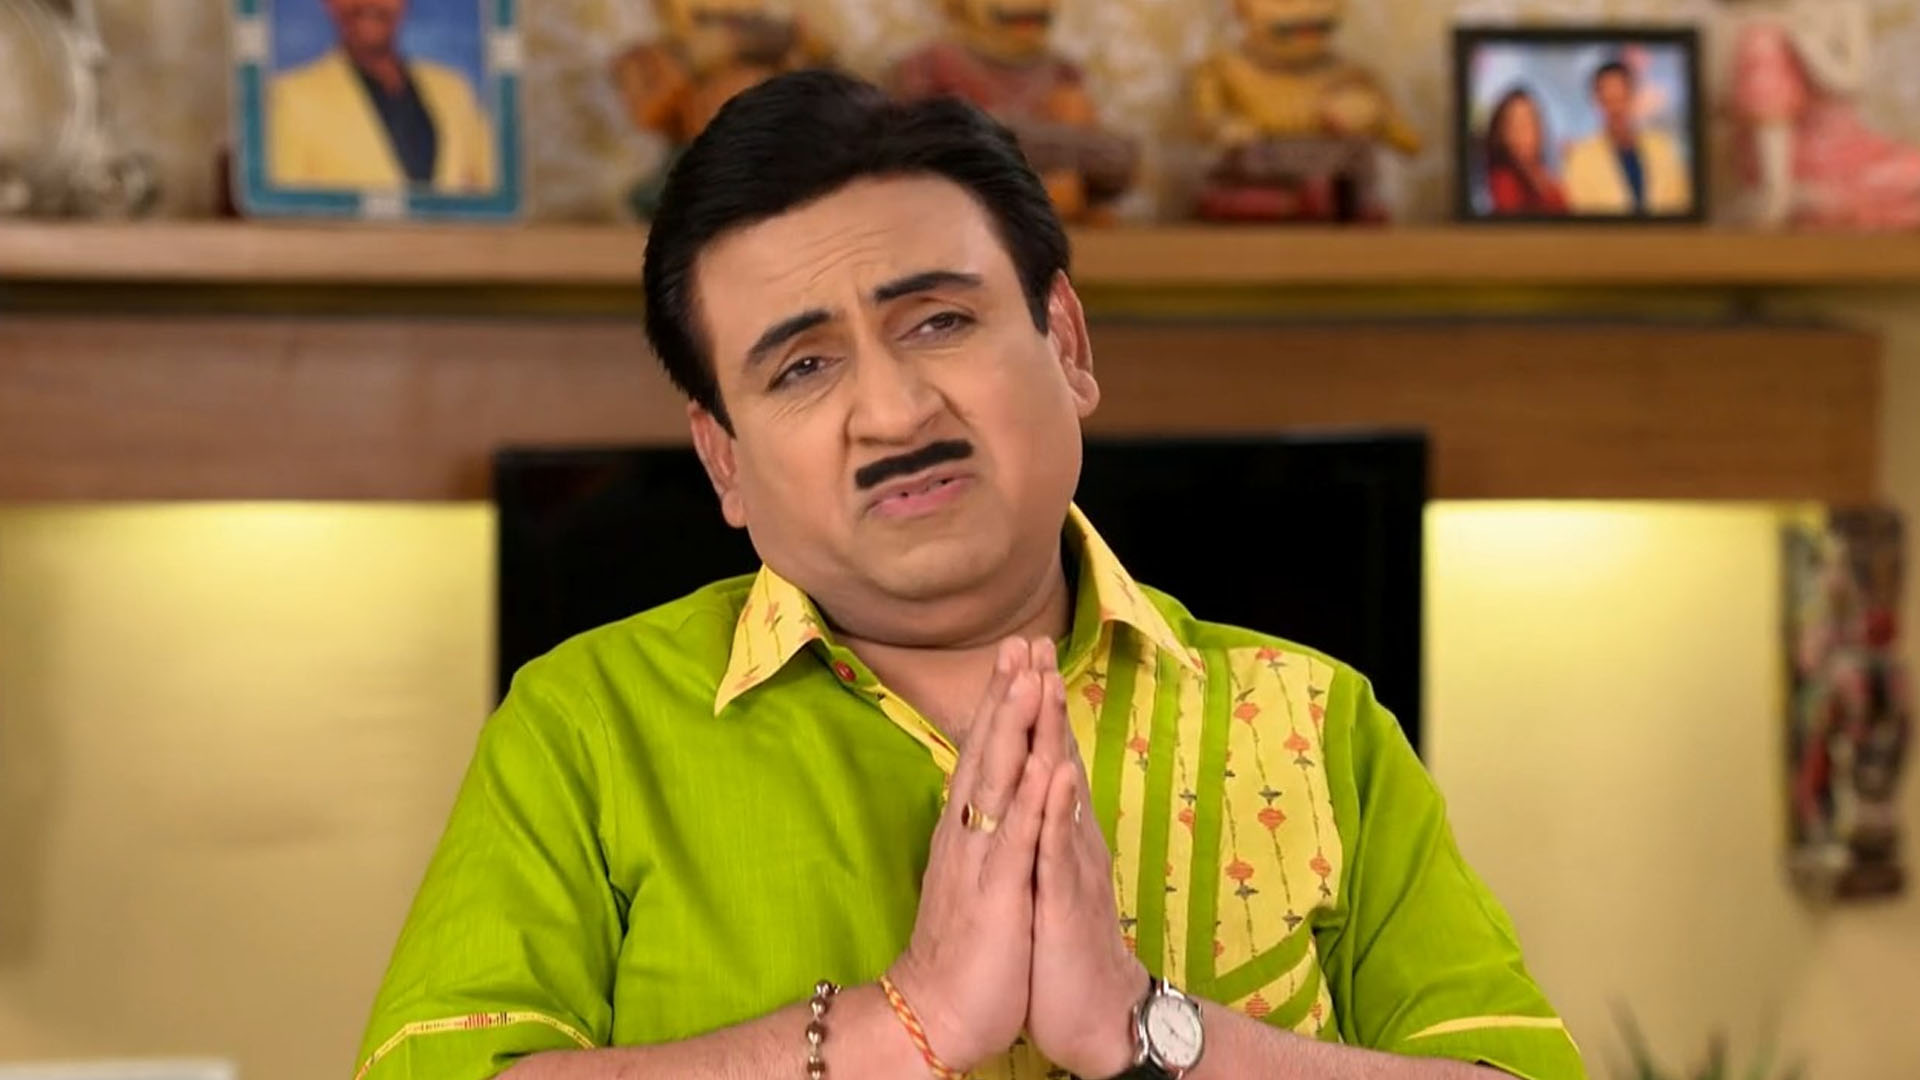 Will Jethalal be able to perform pooja to bring his beloved wife back?